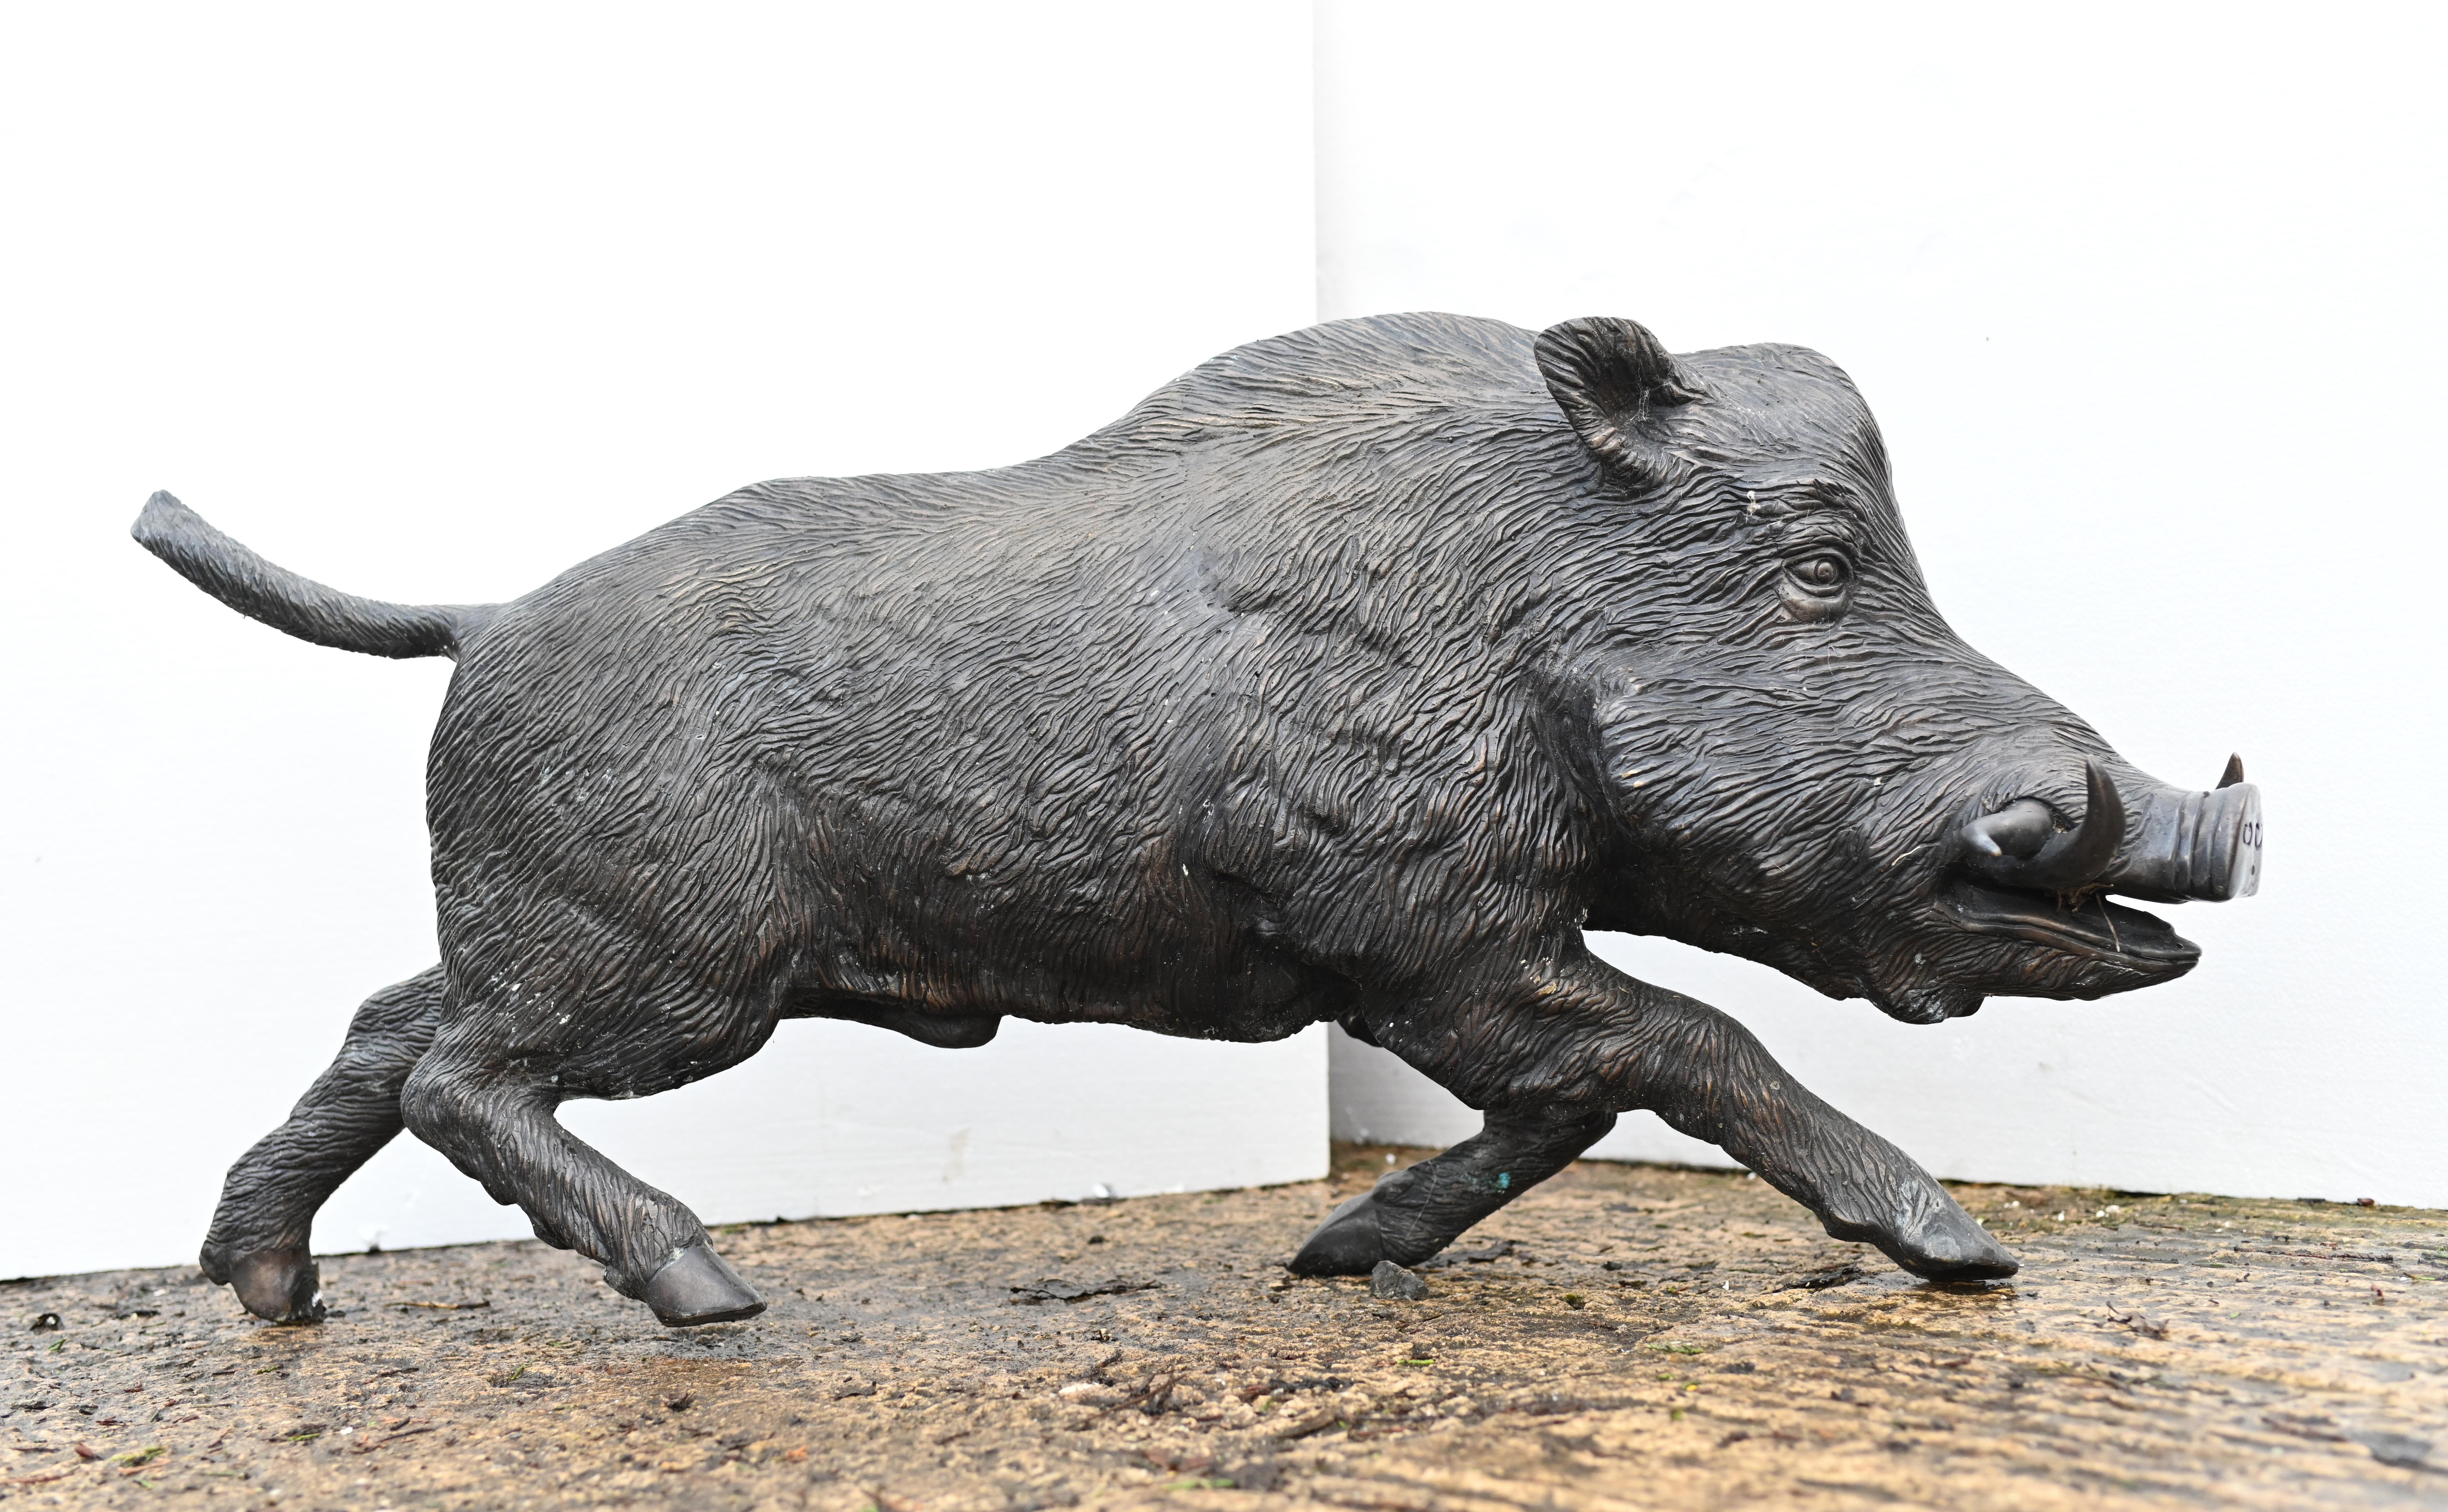 Stunning bronze casting of a lifesize hog or boar
Measures almost four feet in length - 101 CM
-he boar was revered by many cultures, particularly the Celts, for it's fearless warrior like qualities
The patina to this boar is superb, lovely finish